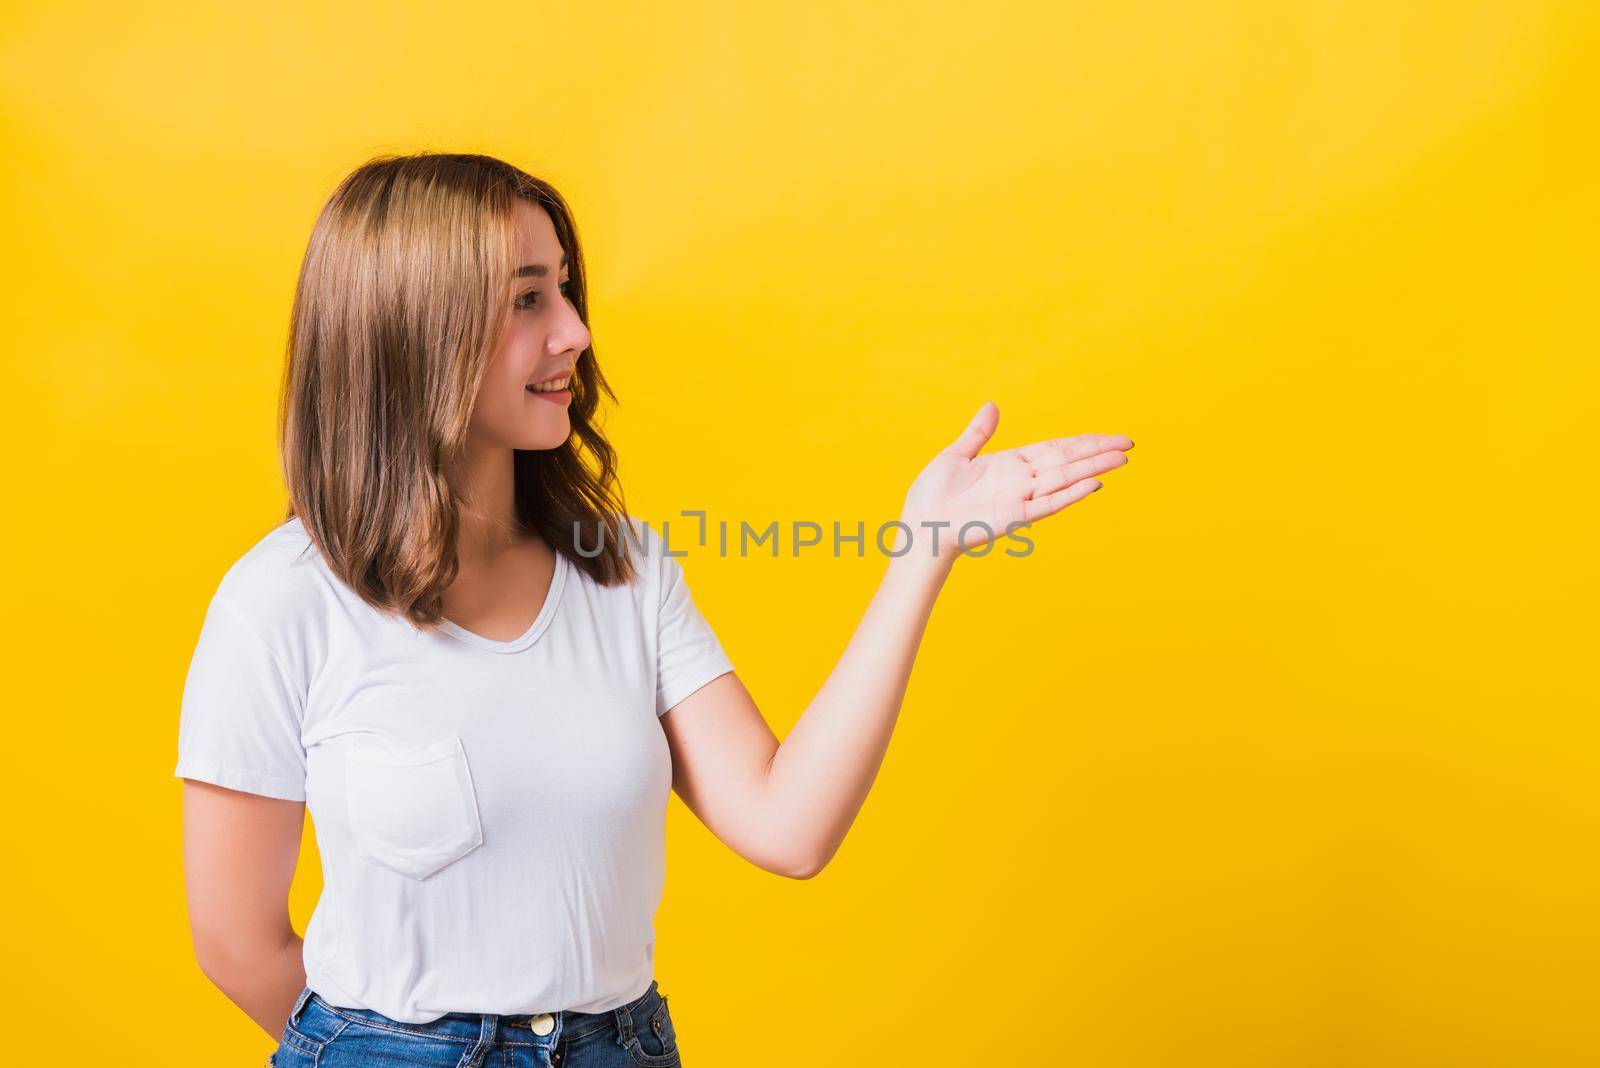 Asian Thai happy portrait beautiful cute young woman standing wear white t-shirt holding something on palm away side looking to side, studio shot isolated on yellow background with copy space